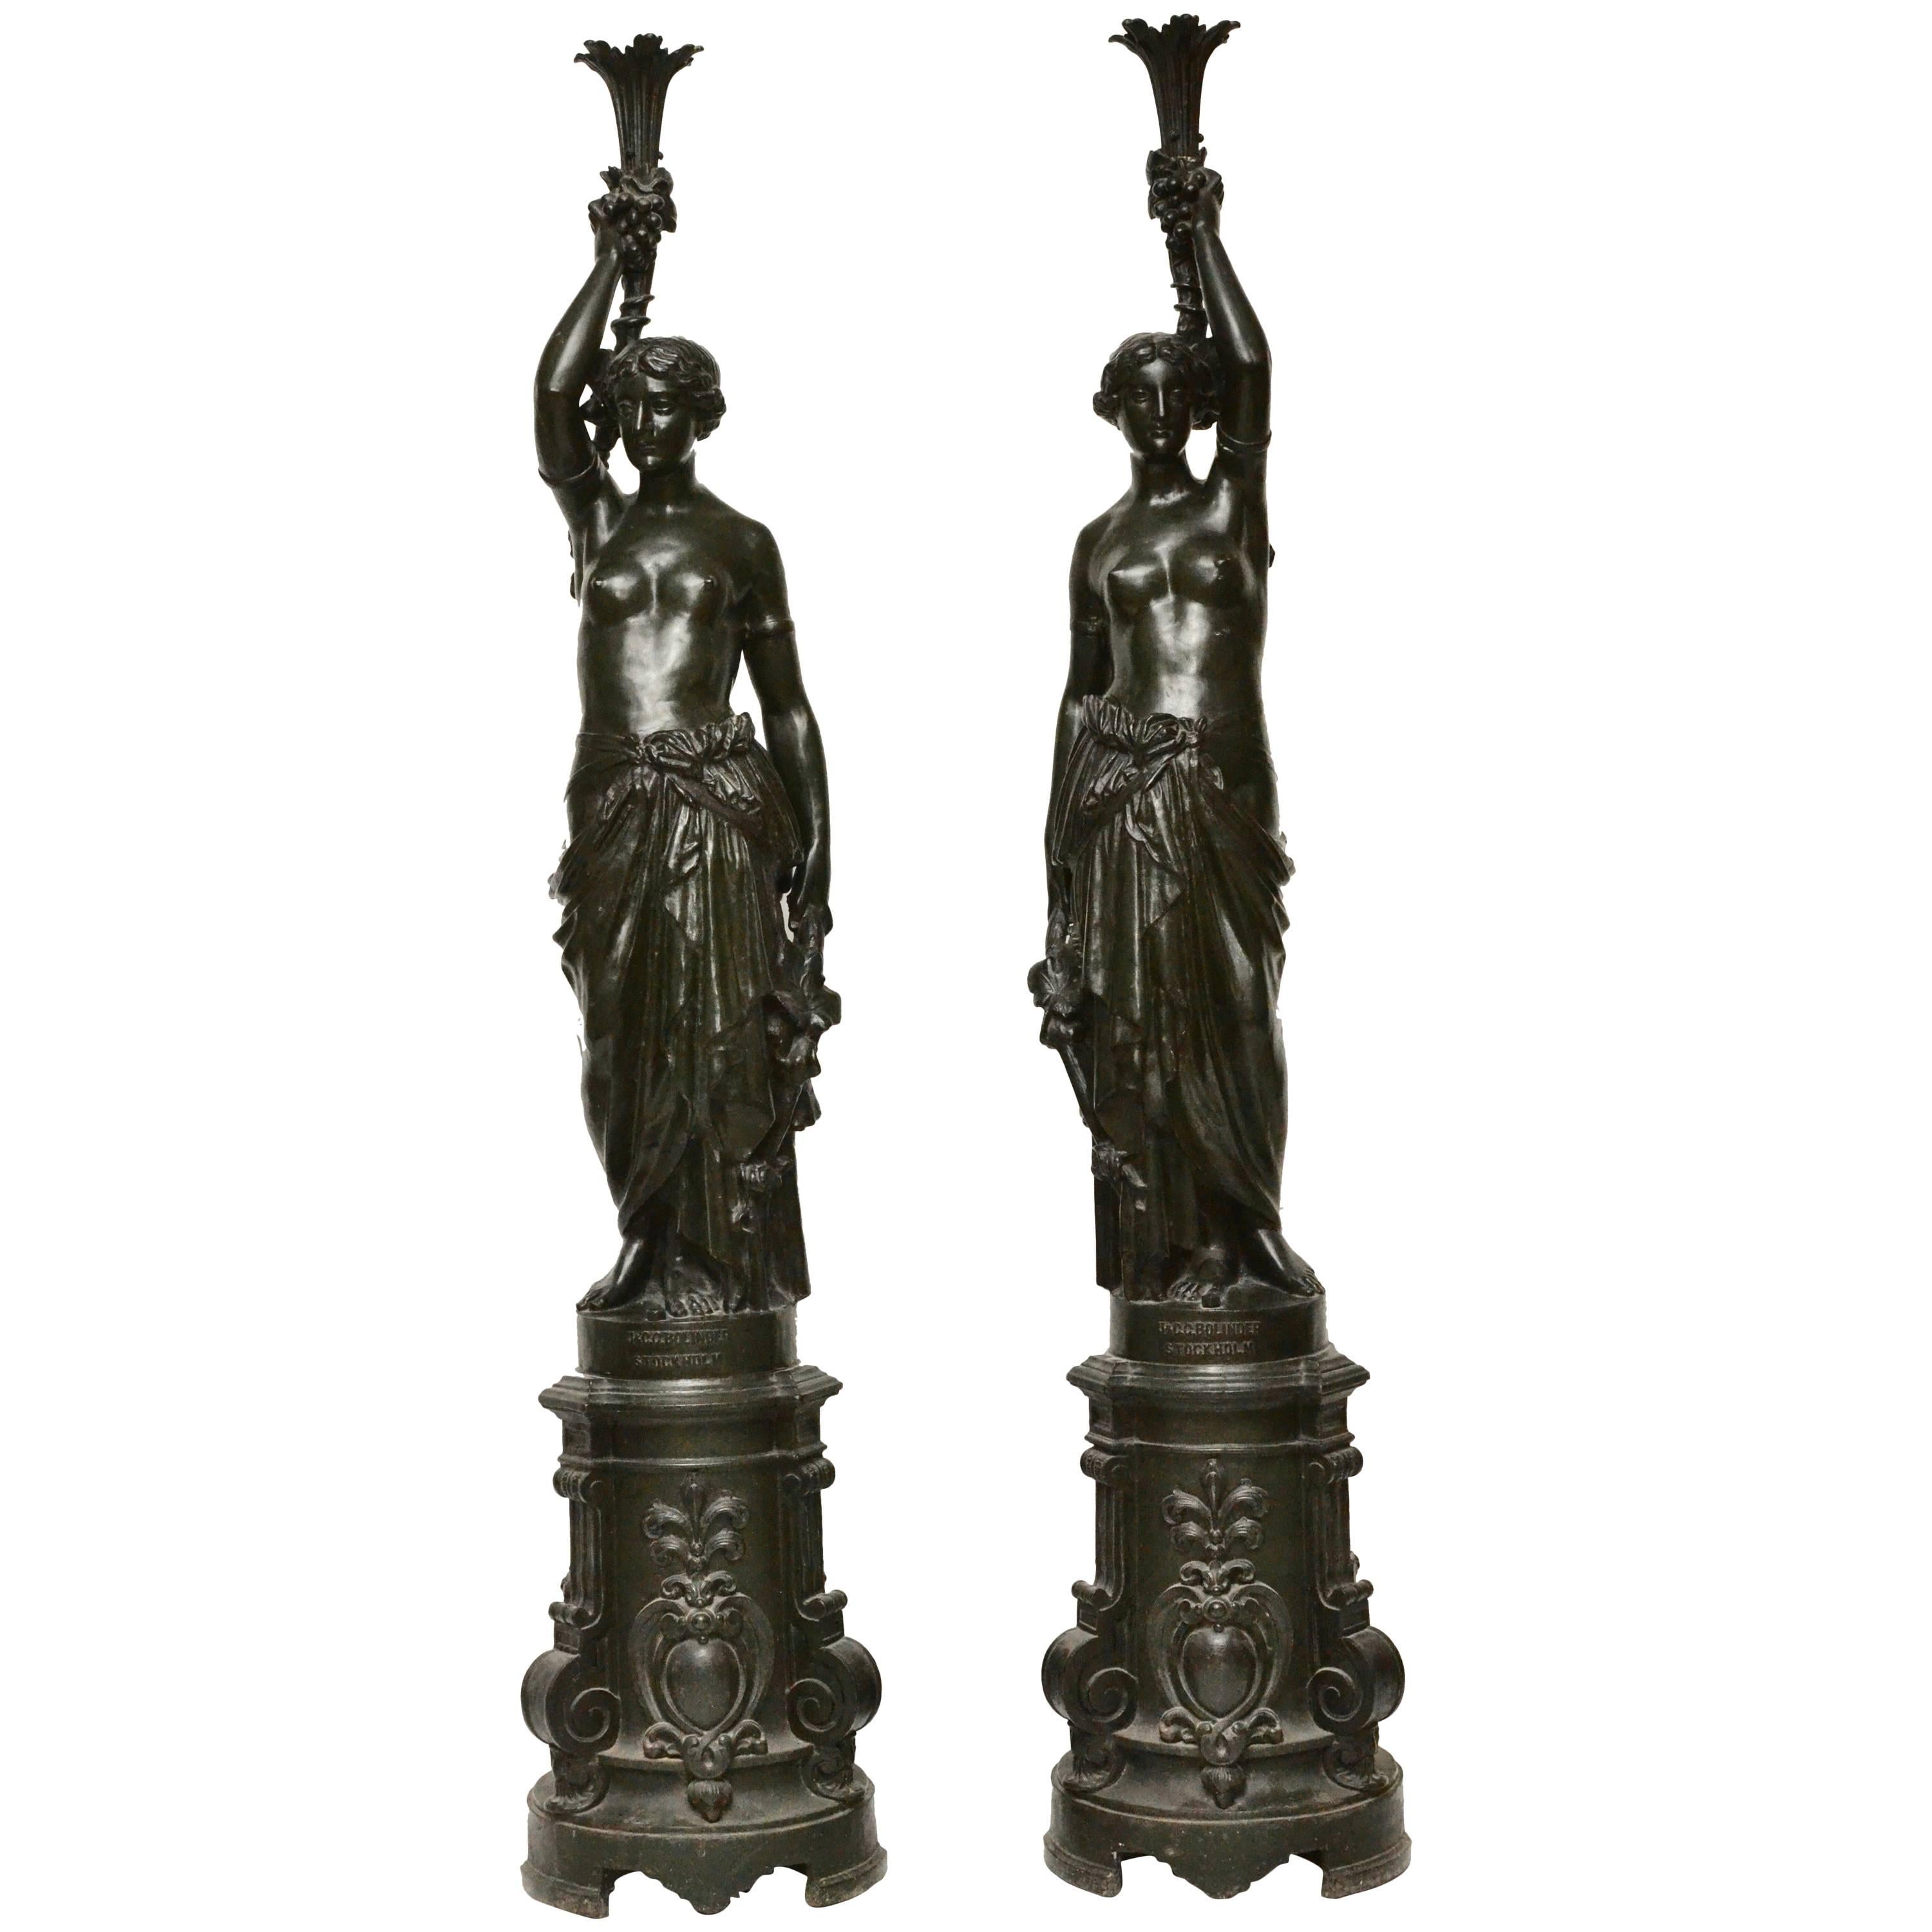 Pair of Large 19th Century Cast Iron Floor lamps Made by Bolinder, Stockholm